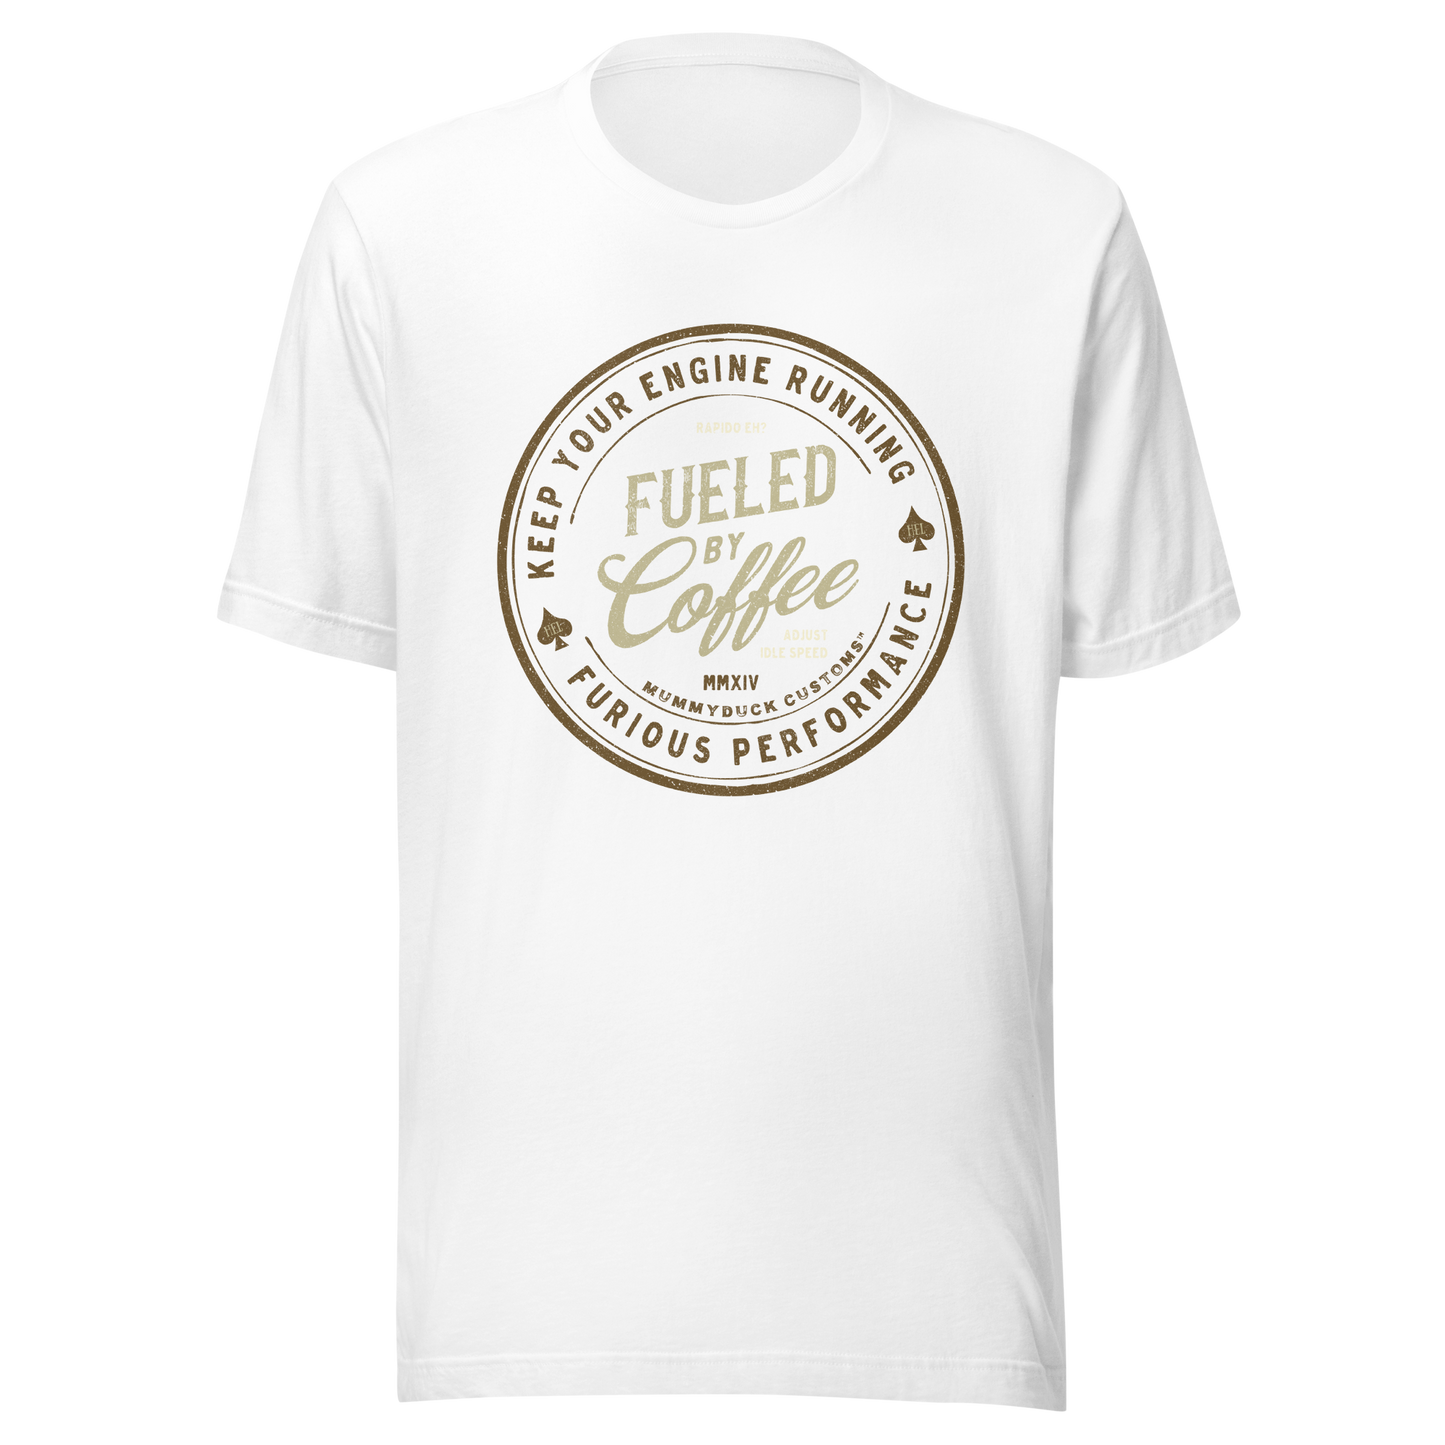 Fueled By Coffee Motorcycle Shirt